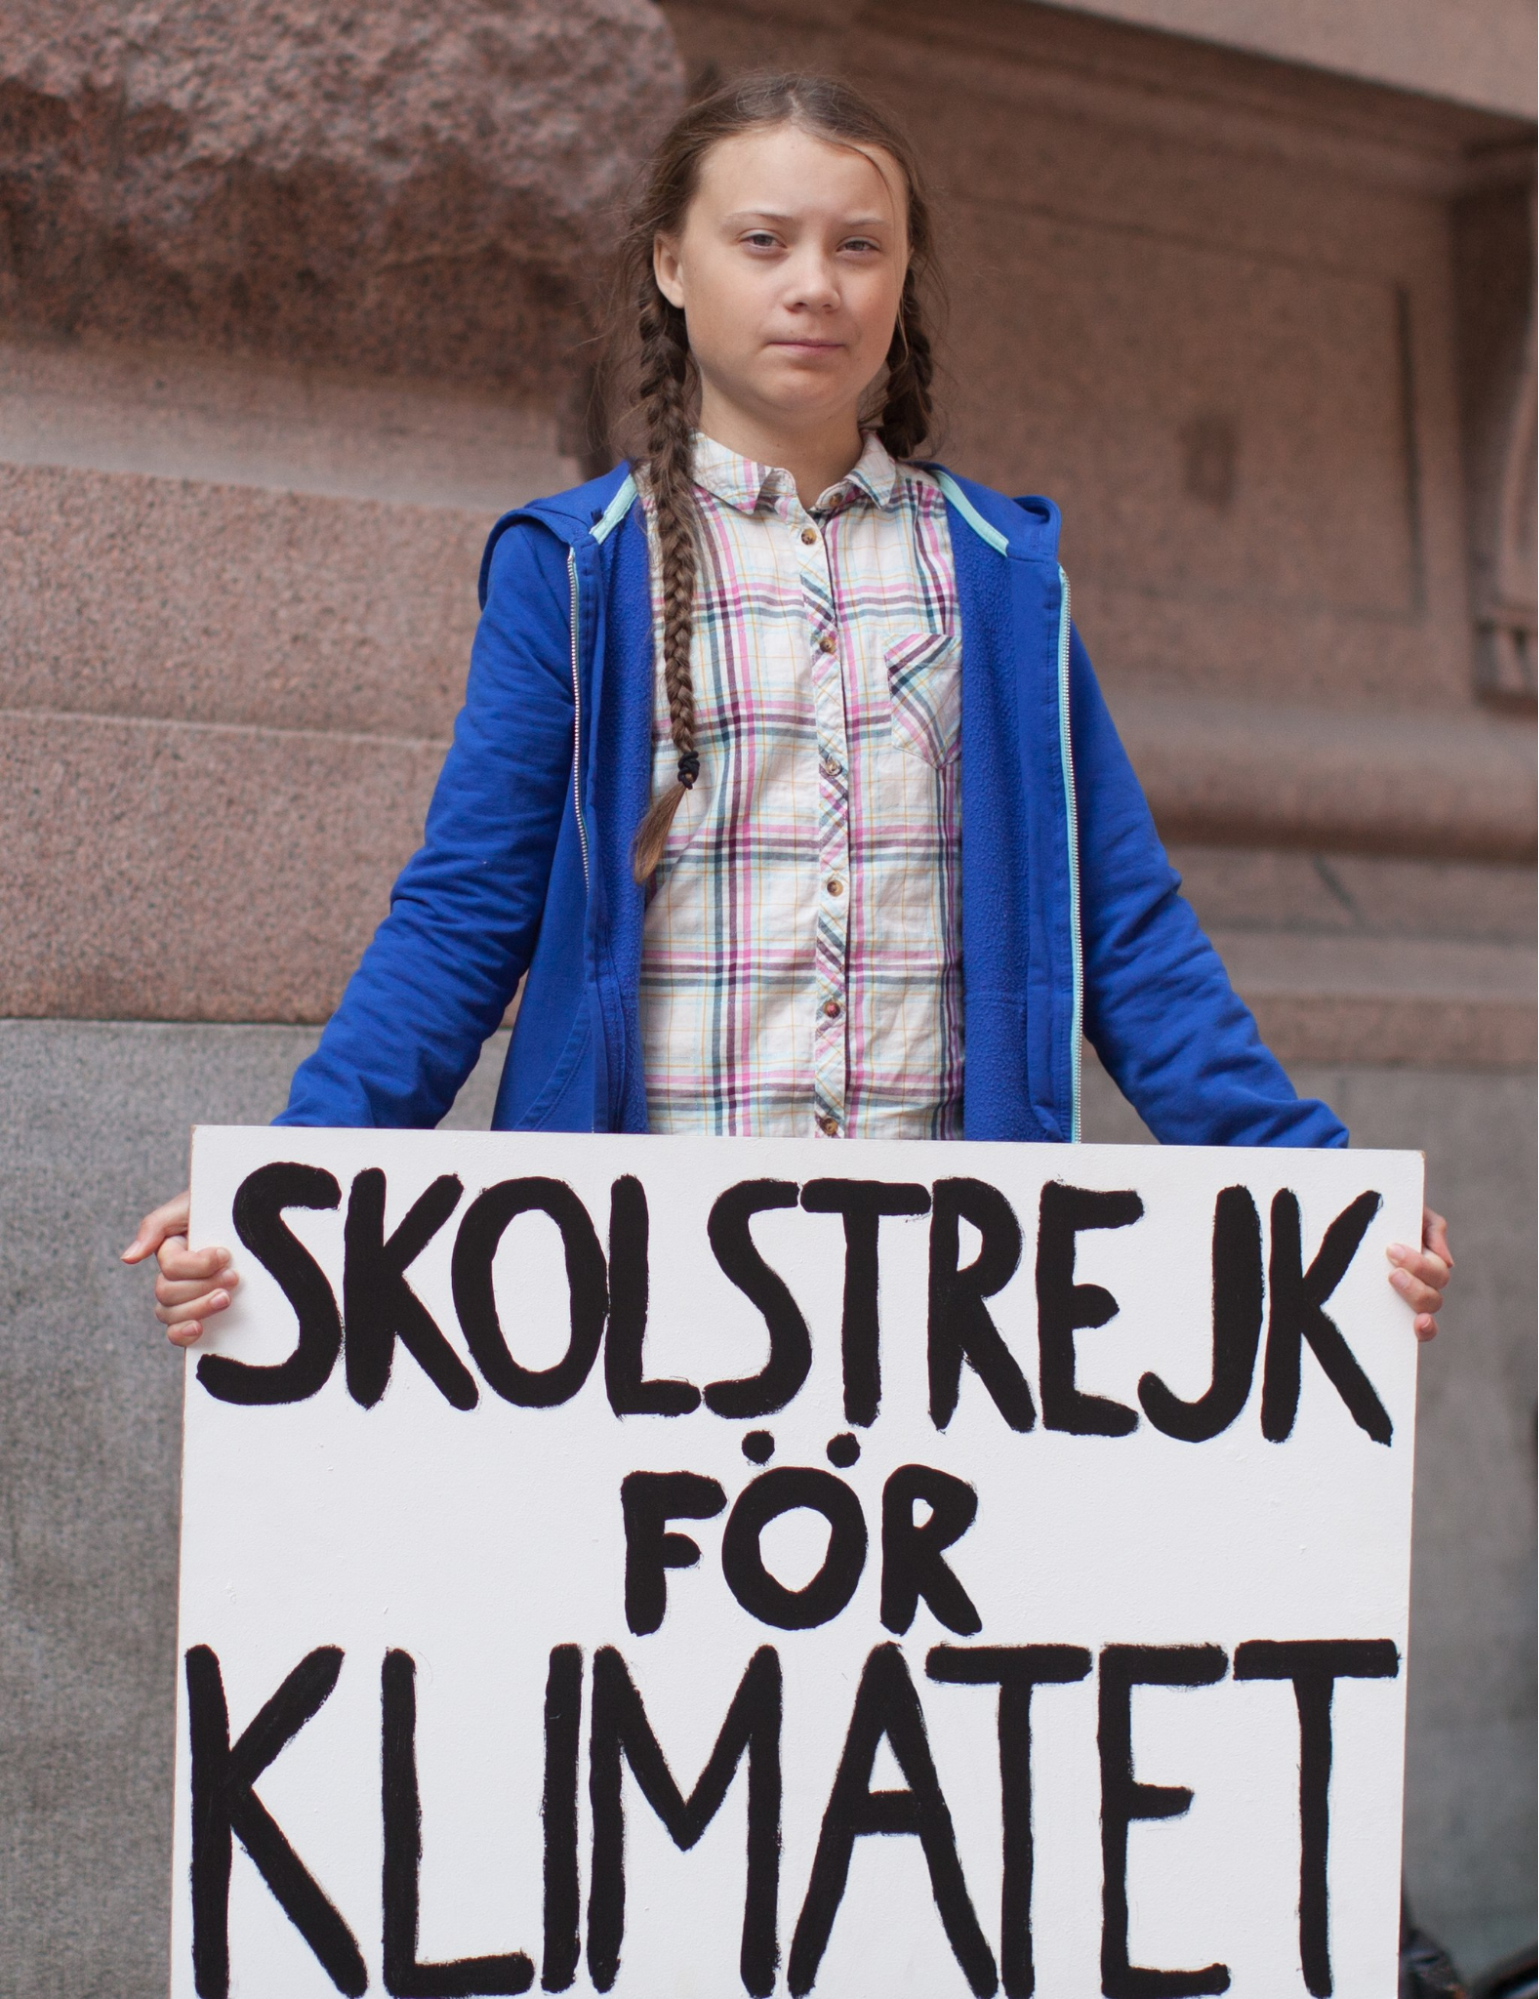 Greta Thunberg holding a sign that says "school climate strike" in Swedish